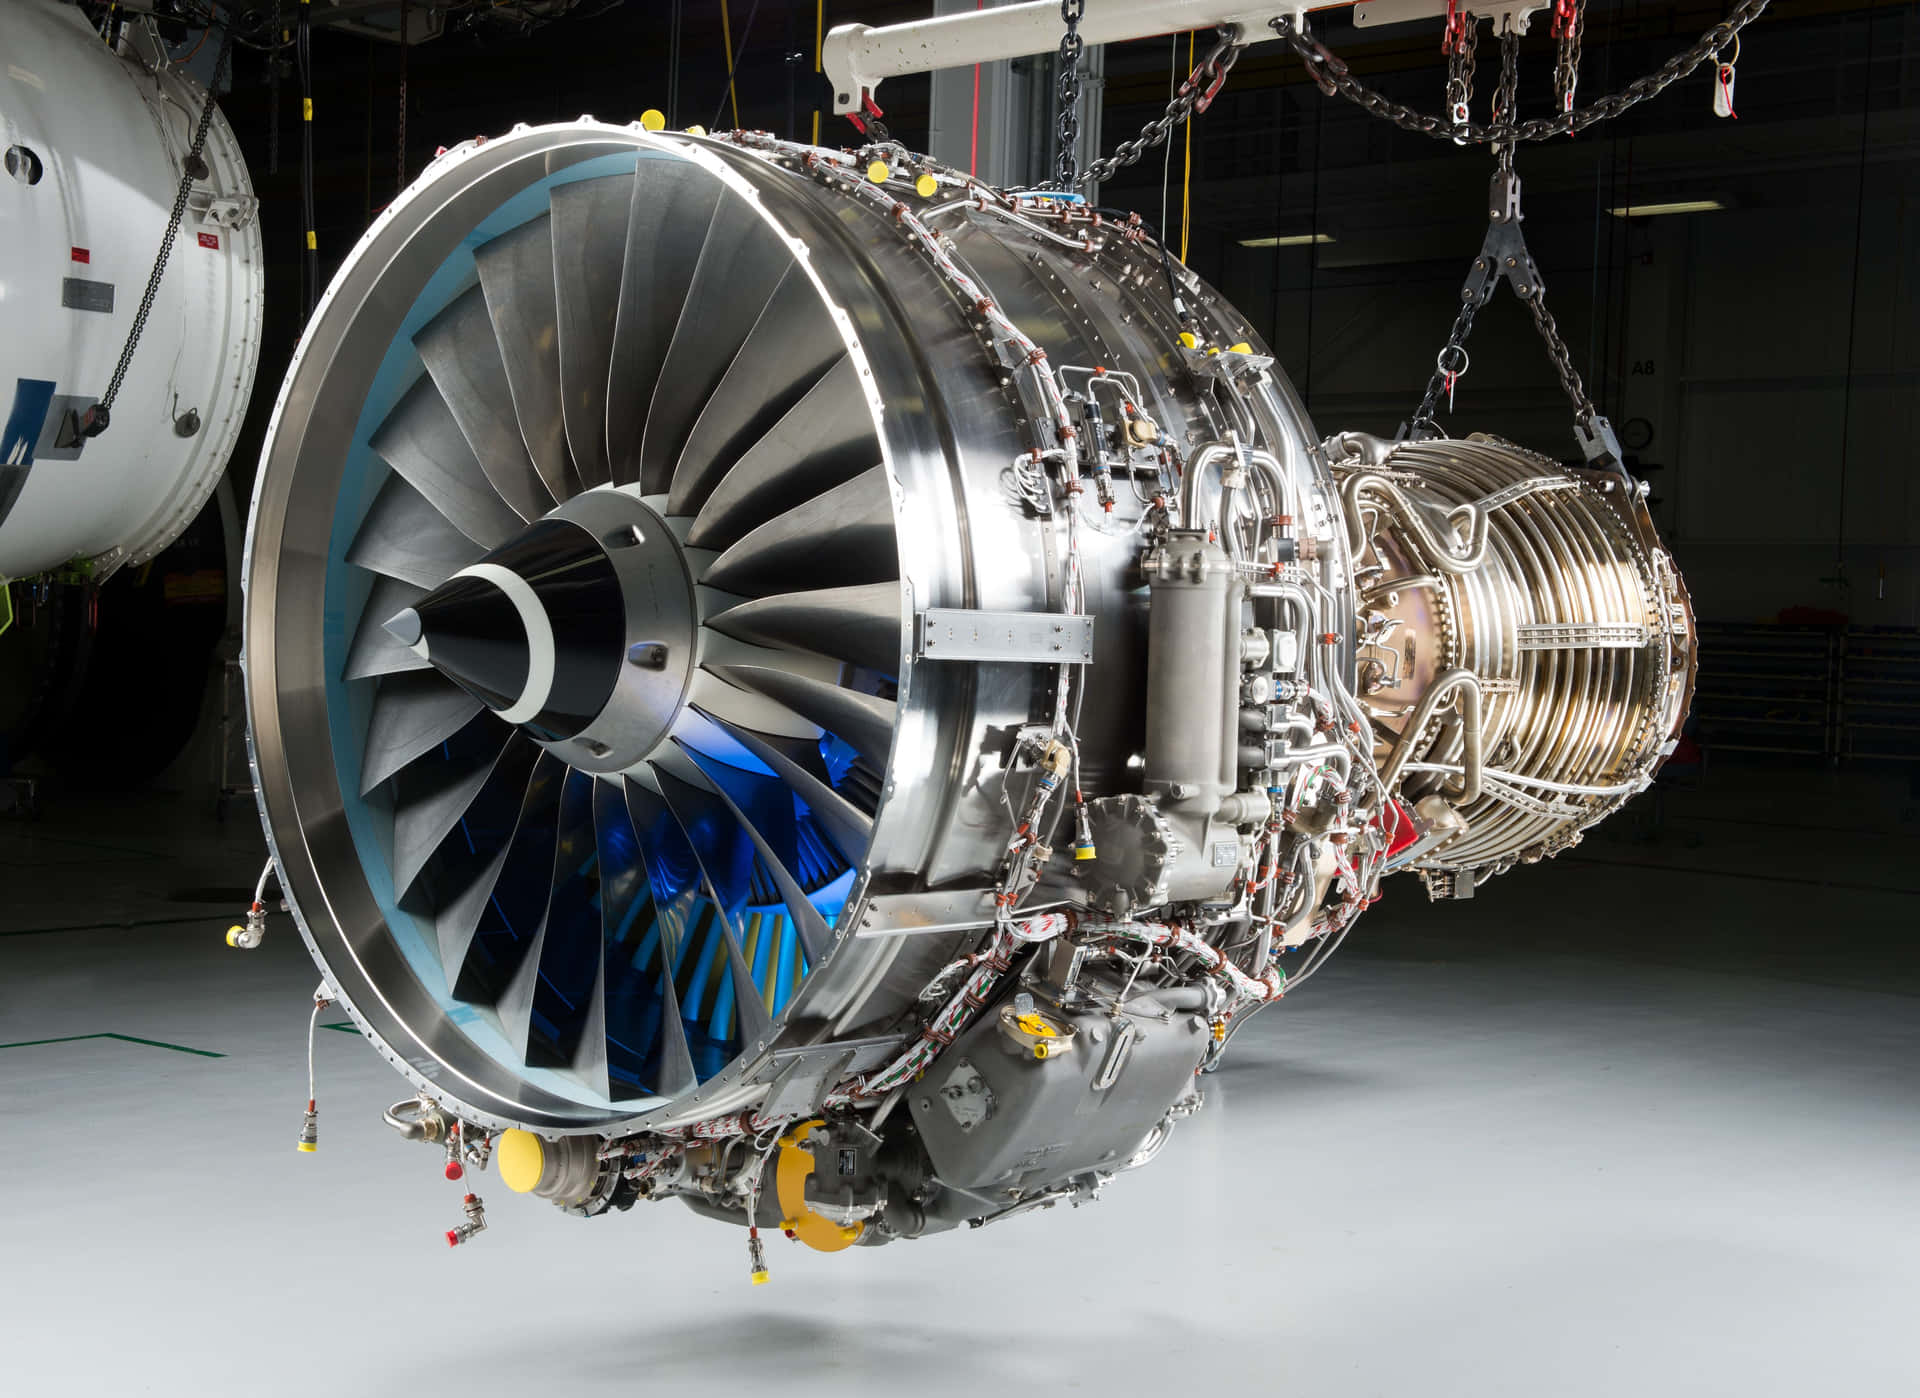 Caption: Close-up of a Powerful Jet Engine Wallpaper